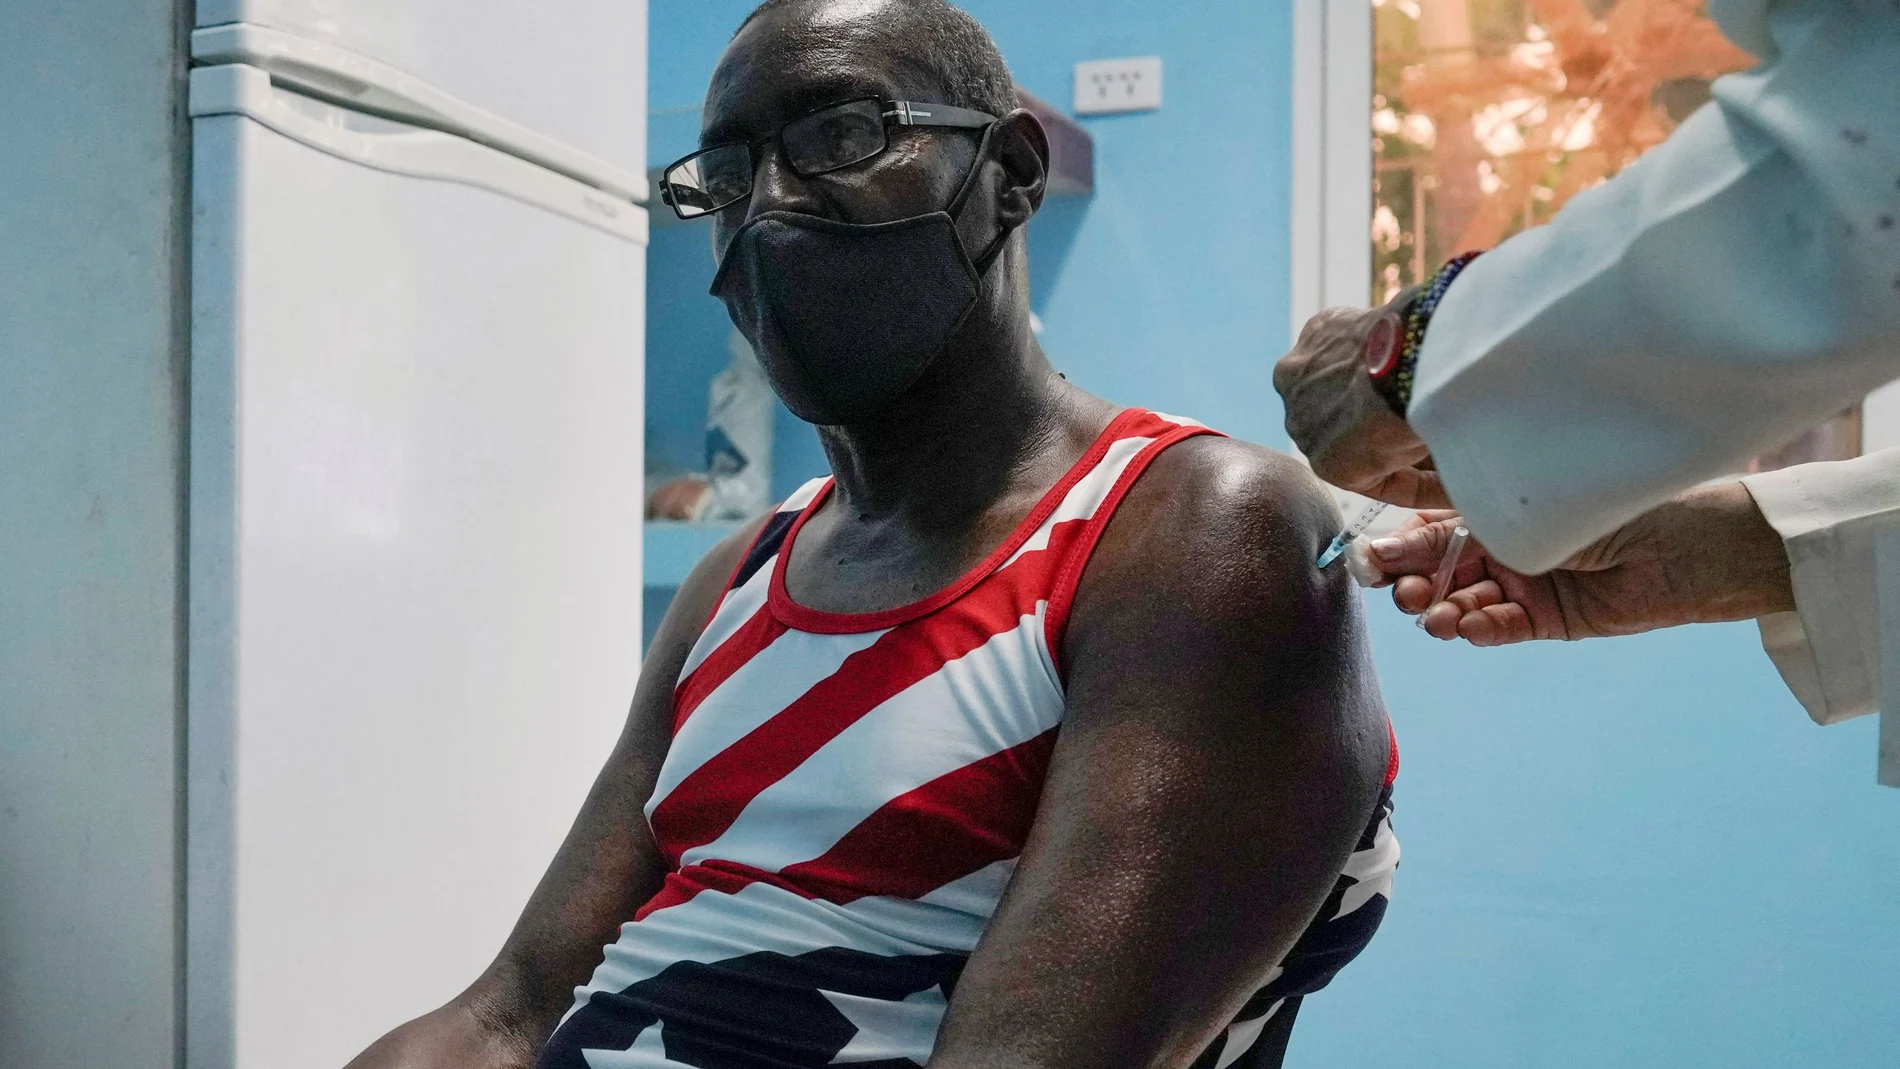 FILE PHOTO: A man is vaccinated at a vaccination center amid concerns about the spread of the coronavirus disease (COVID-19) in Havana, Cuba, June 17, 2021. REUTERS/Alexandre Meneghini/File Photo